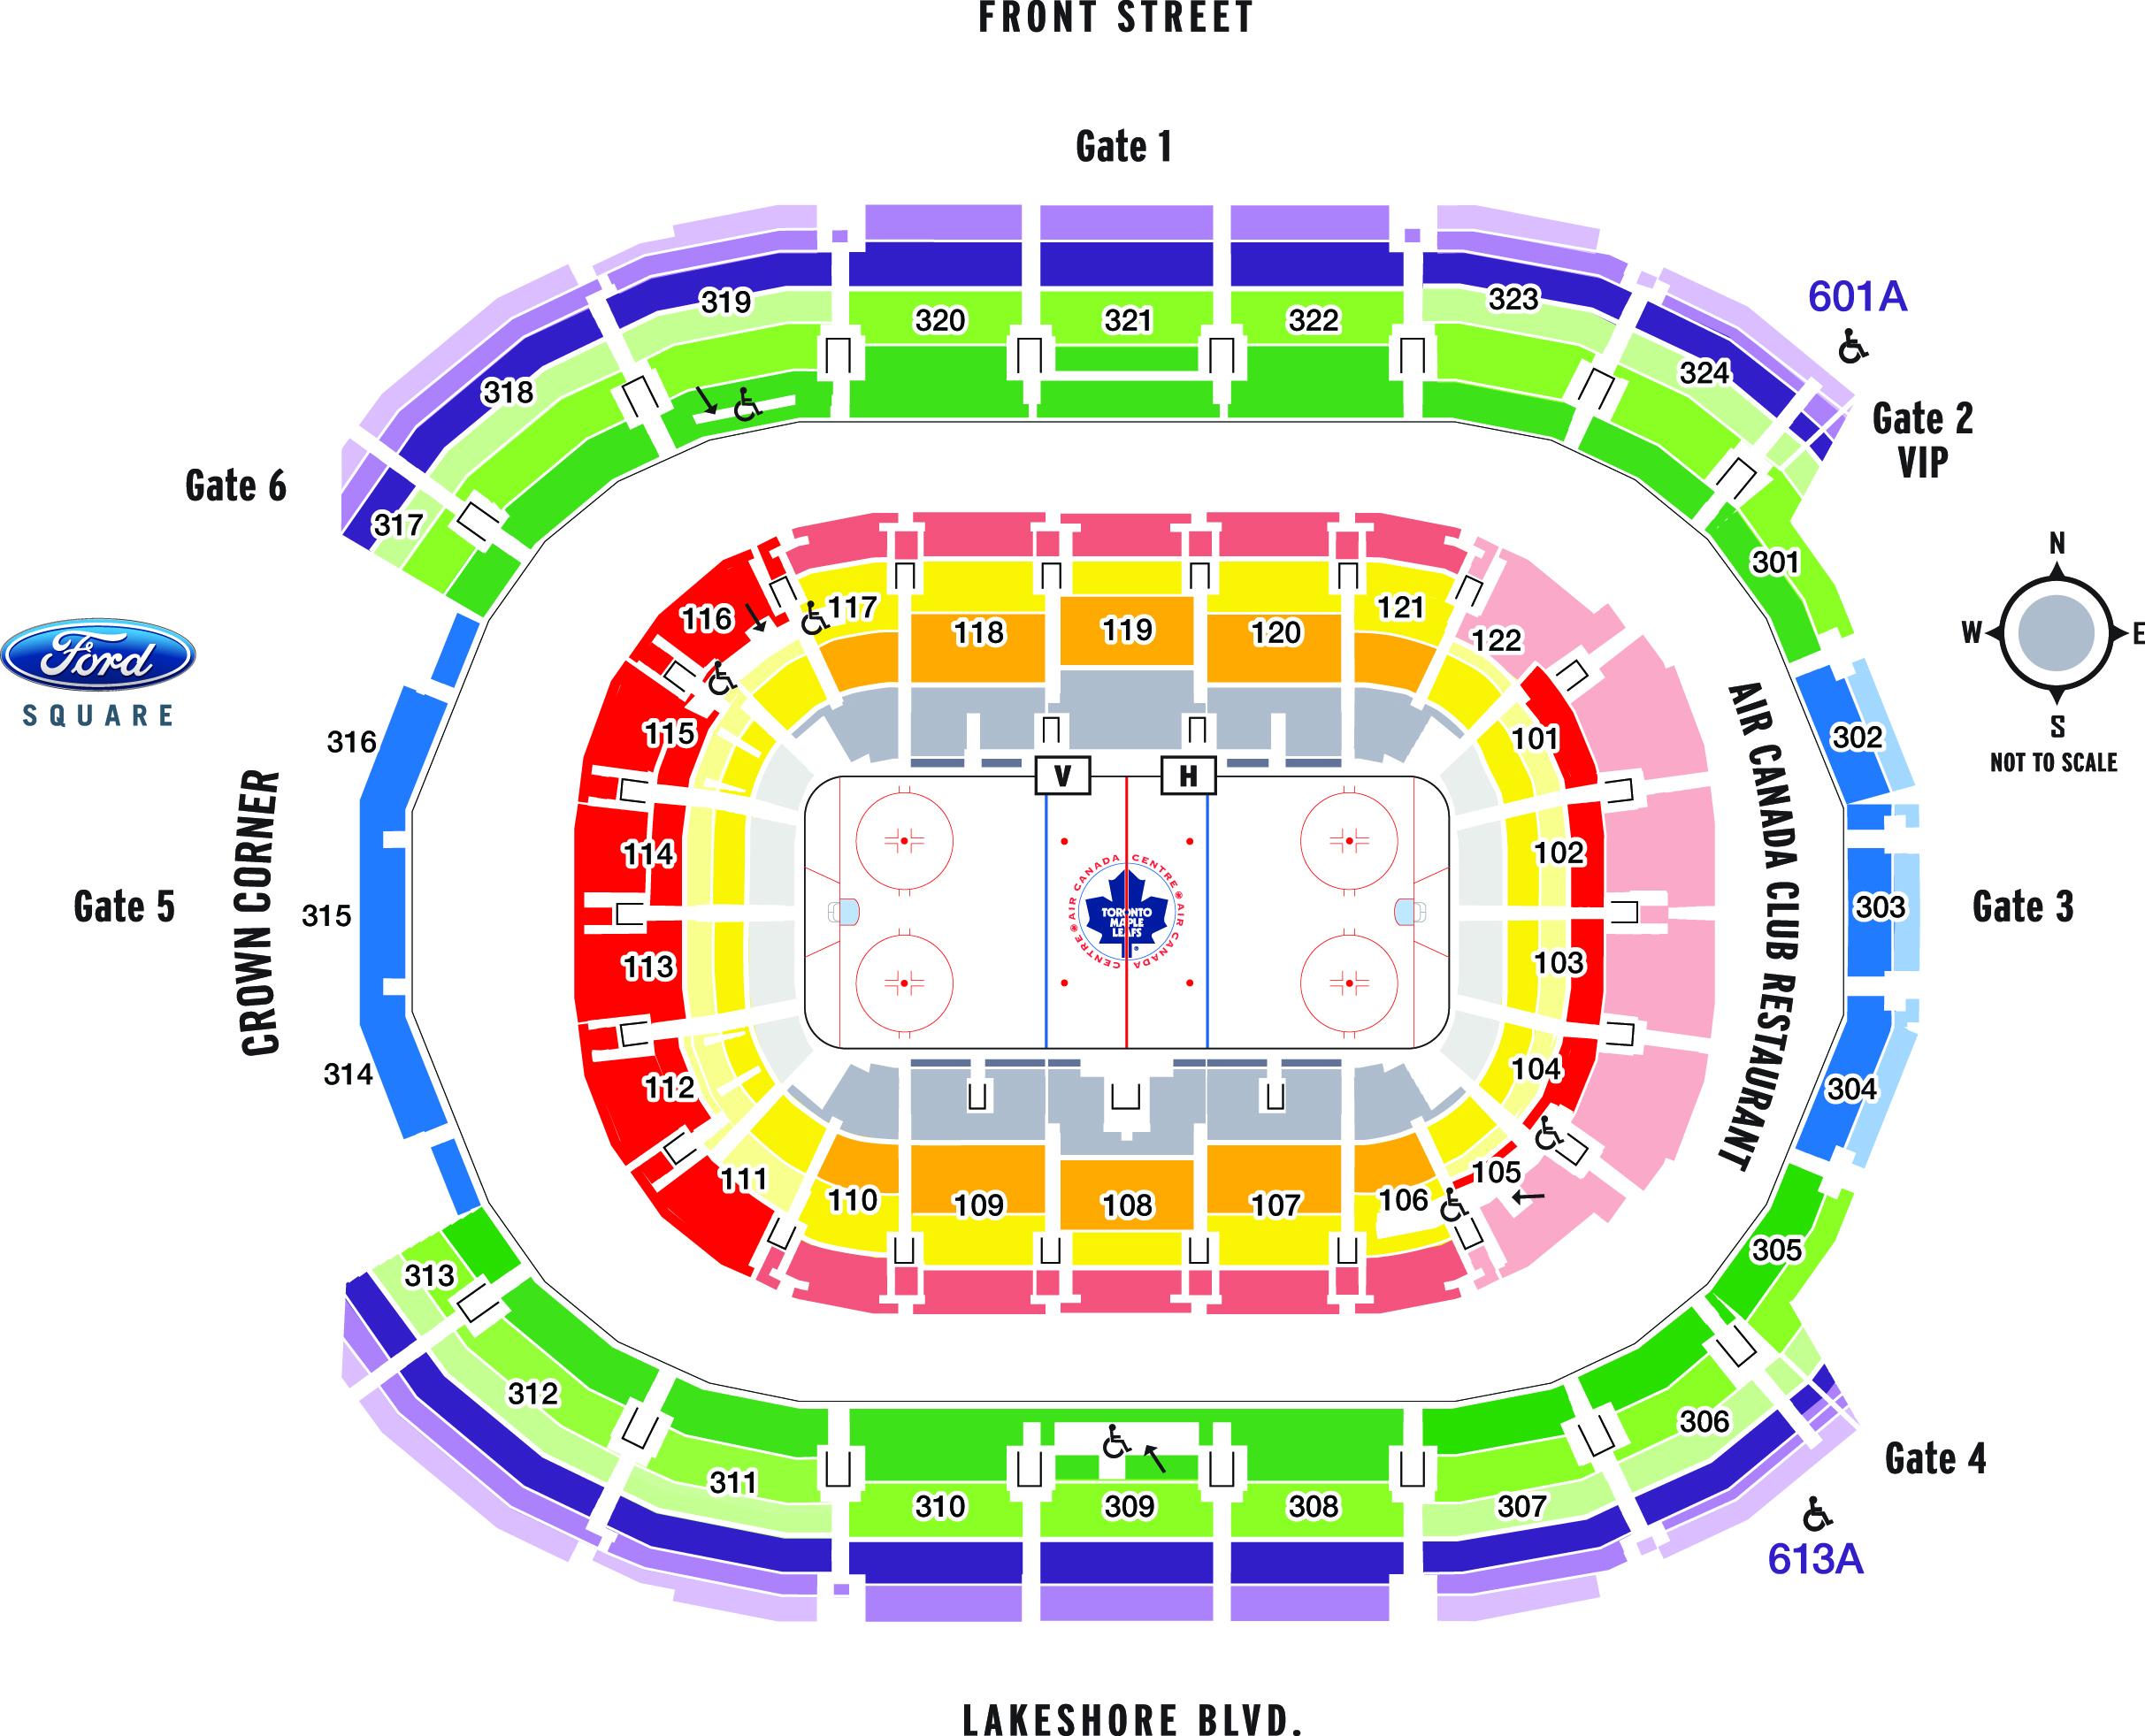 Air Canada Centre : Toronto, Events, Concert, Tickets, Seating Map